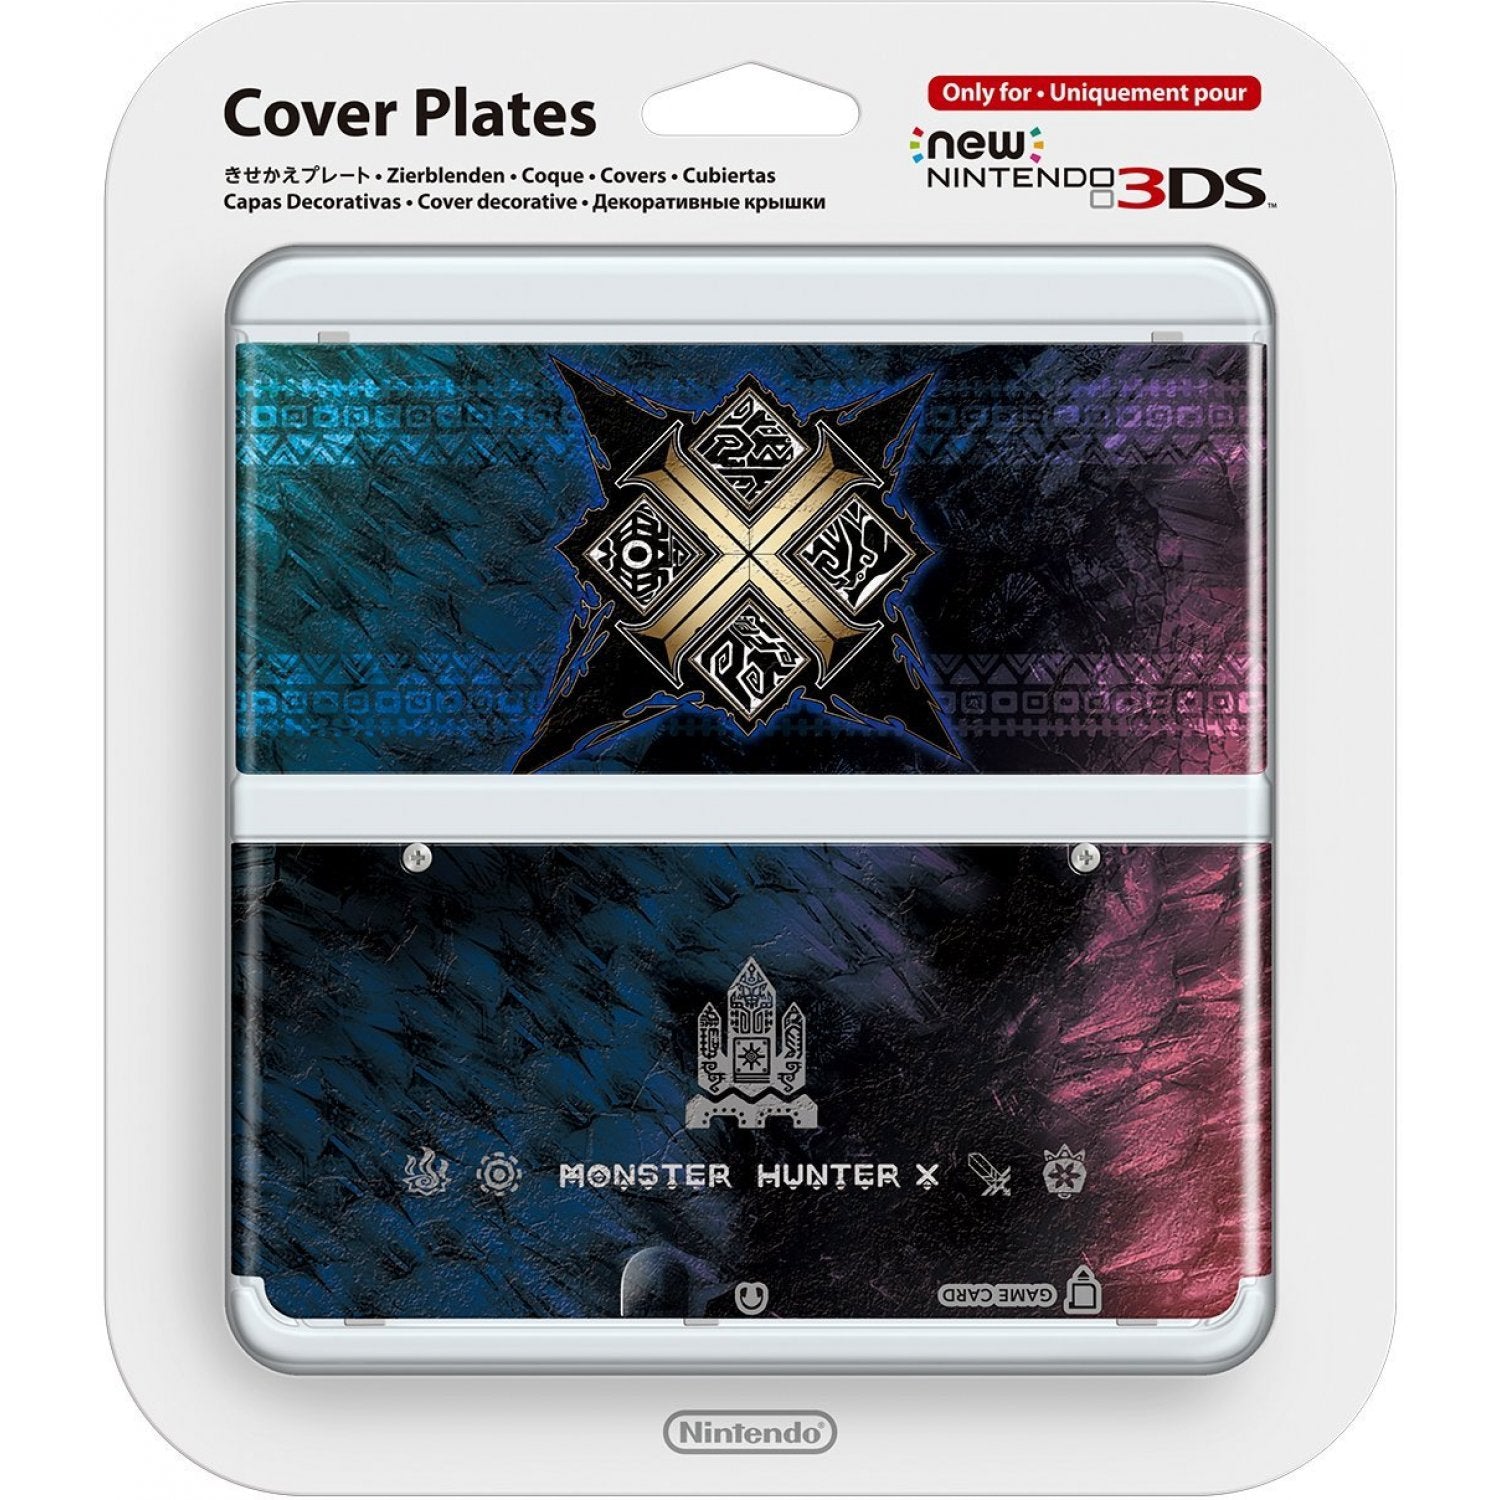 New Nintendo 3DS Cover Plates No.065 (Monster Hunter X) - New Nintendo 3DS (Japanese Import) Accessories Nintendo   